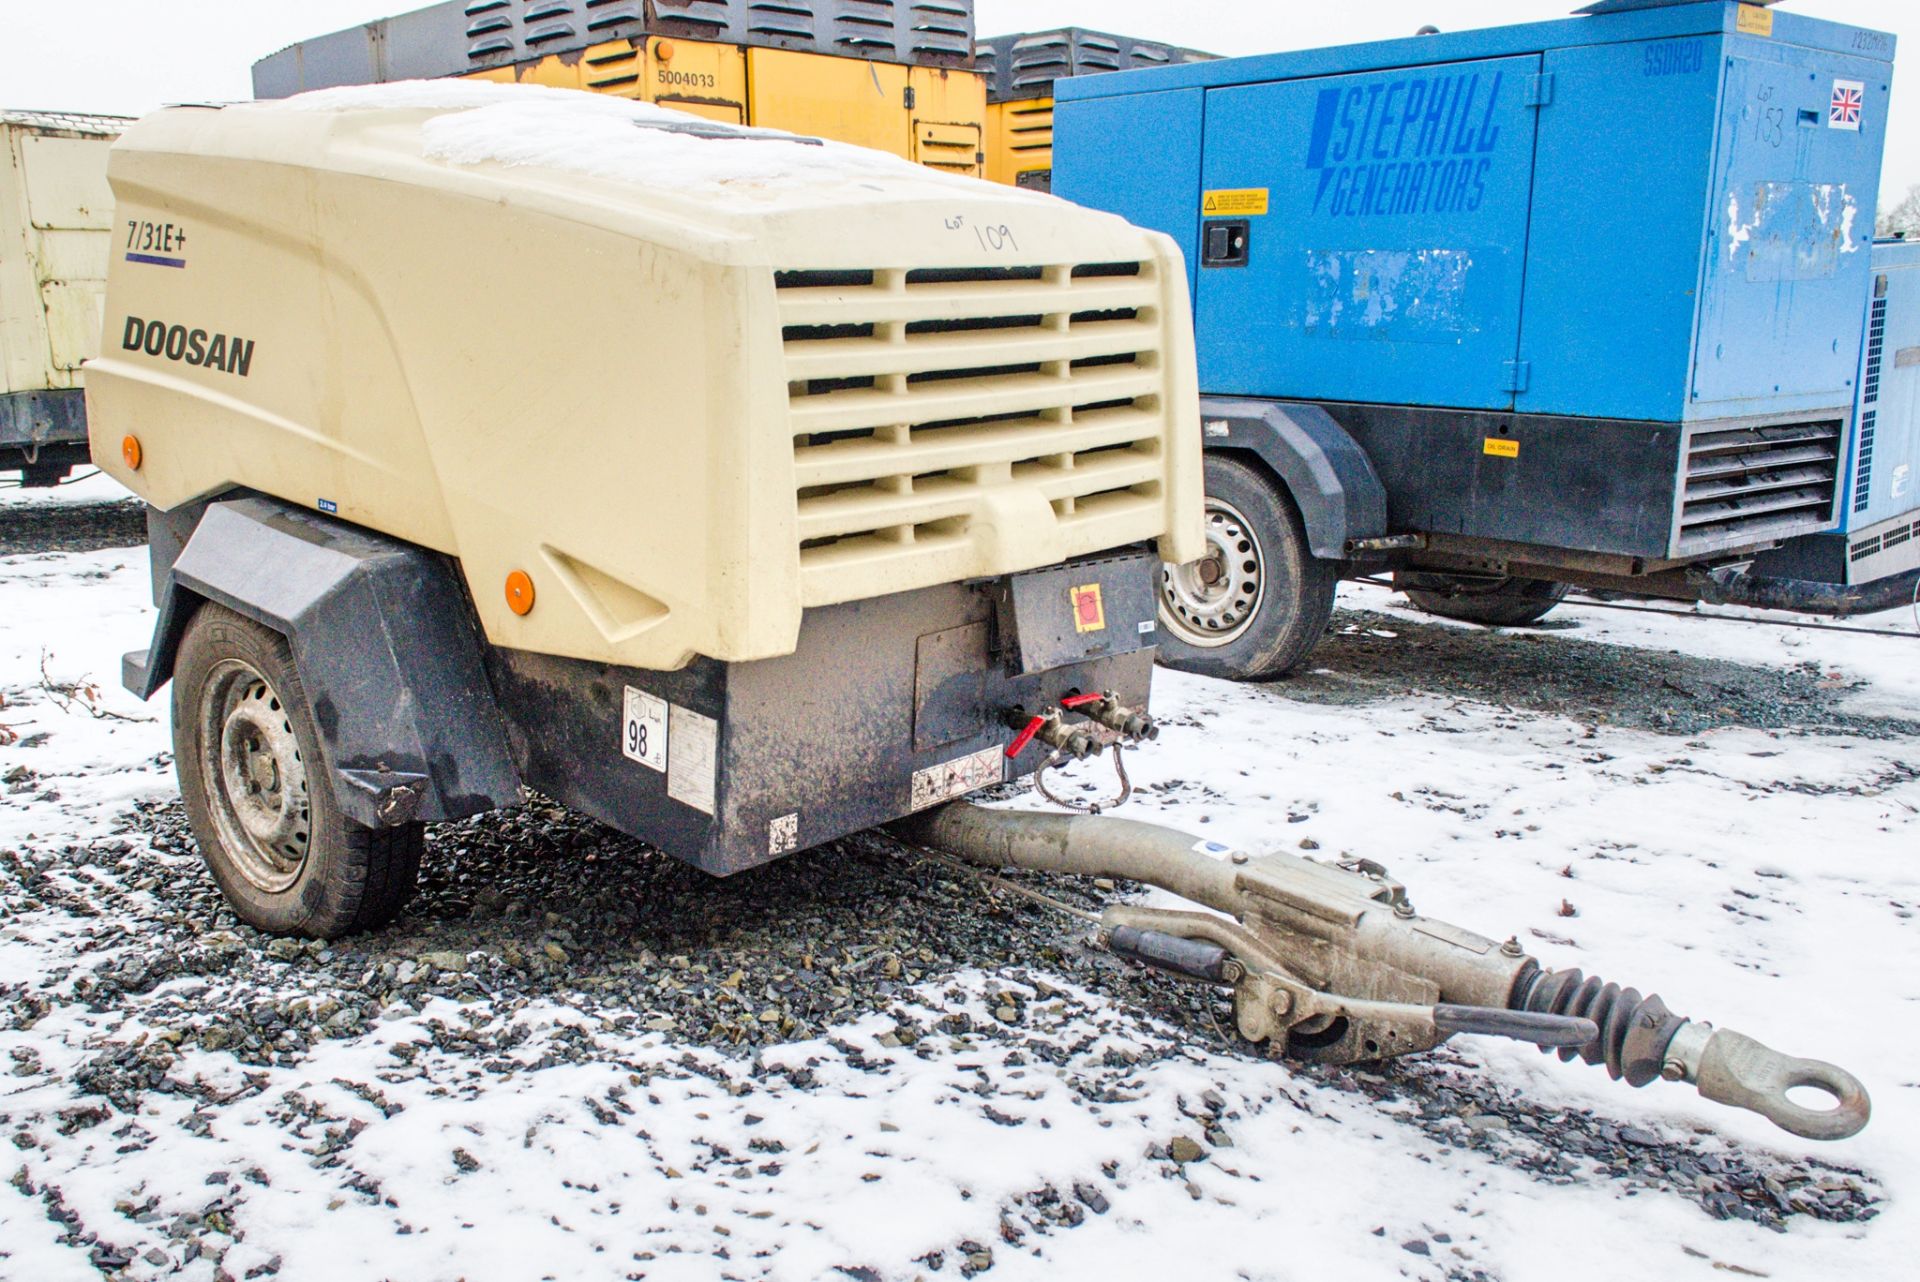 Doosan 7/31E+ diesel driven mobile air compressor Year: 2016 S/N: 323710 Recorded Hours: 147 VPD